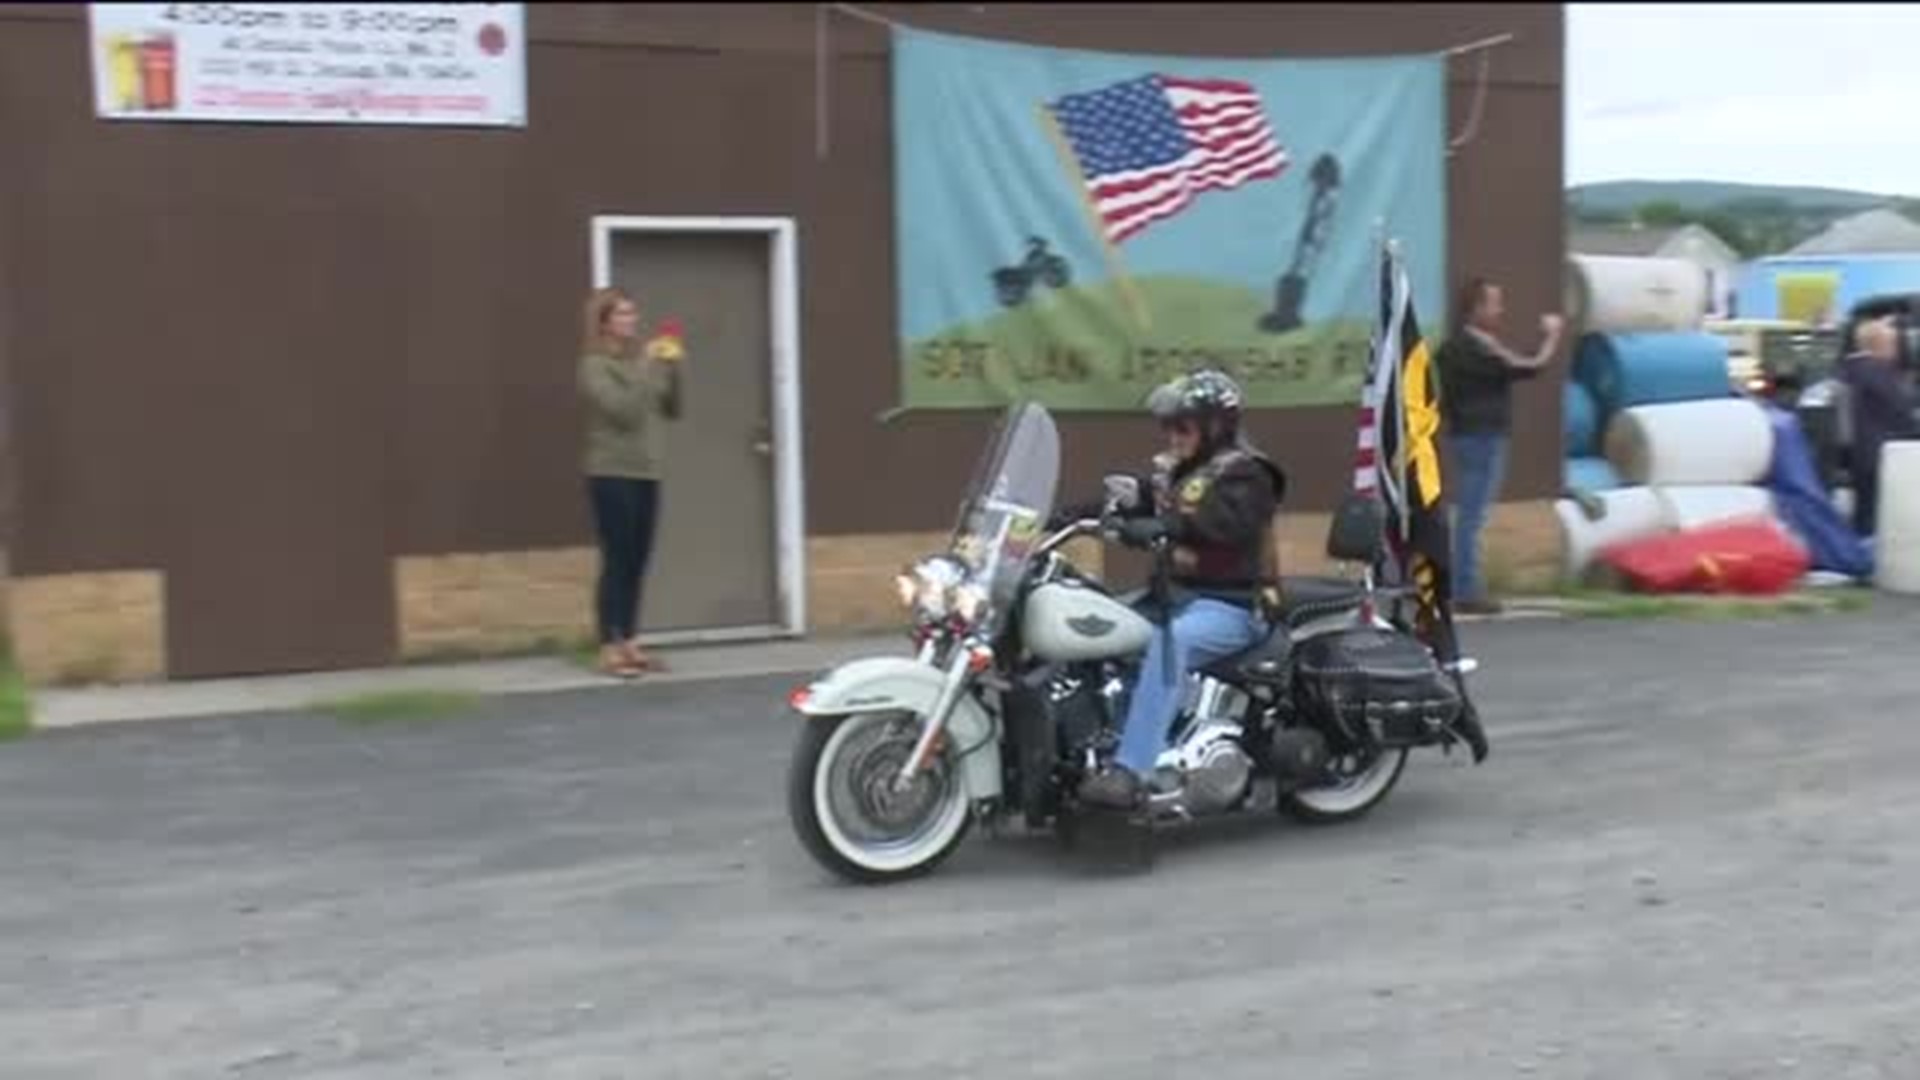 Annual Motorcycle Ride & Fundraiser for Fallen Soldier